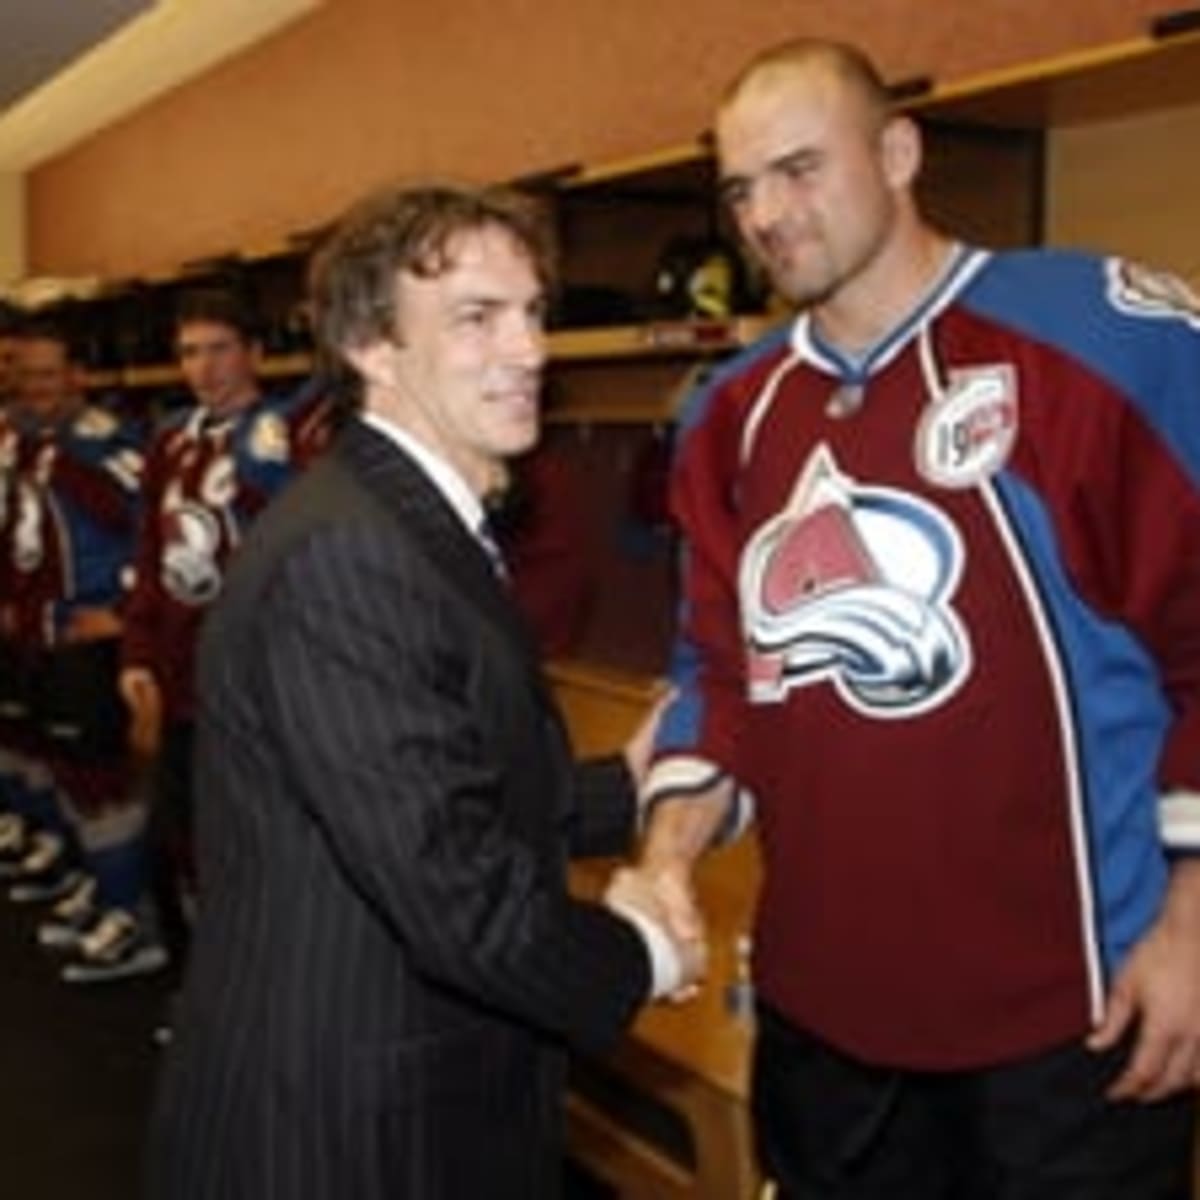 So many great NHL players were retiring when I started watching hockey more  regularly, like Joe Sakic, Steve Yzerman, Peter Forsberg (although he tried  to make a comeback). If you had the